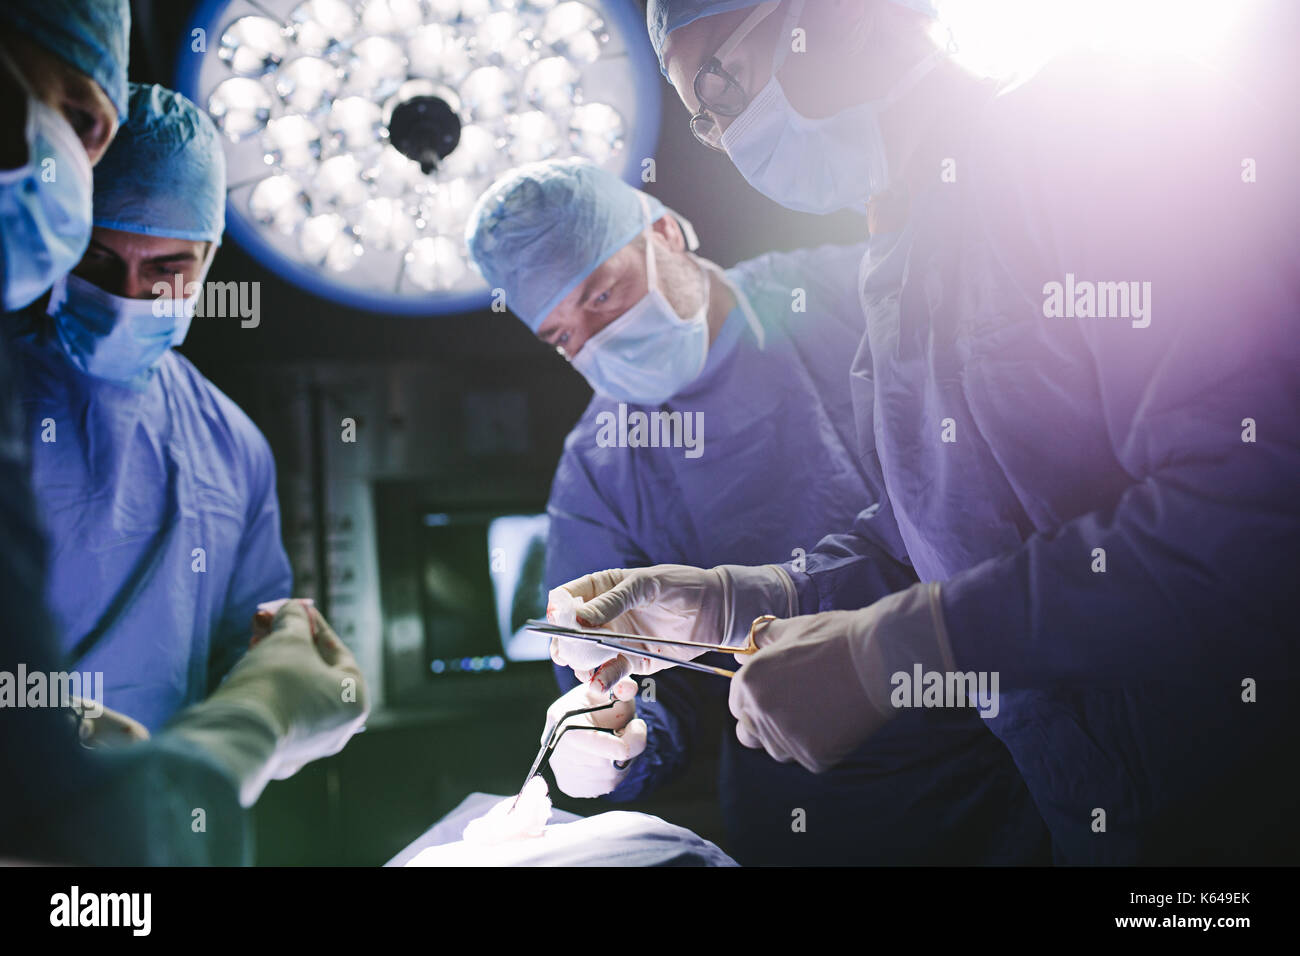 Team of doctors performing surgical procedure in operating theater. Professional surgeons performing surgery in operating room of a hospital. Stock Photo